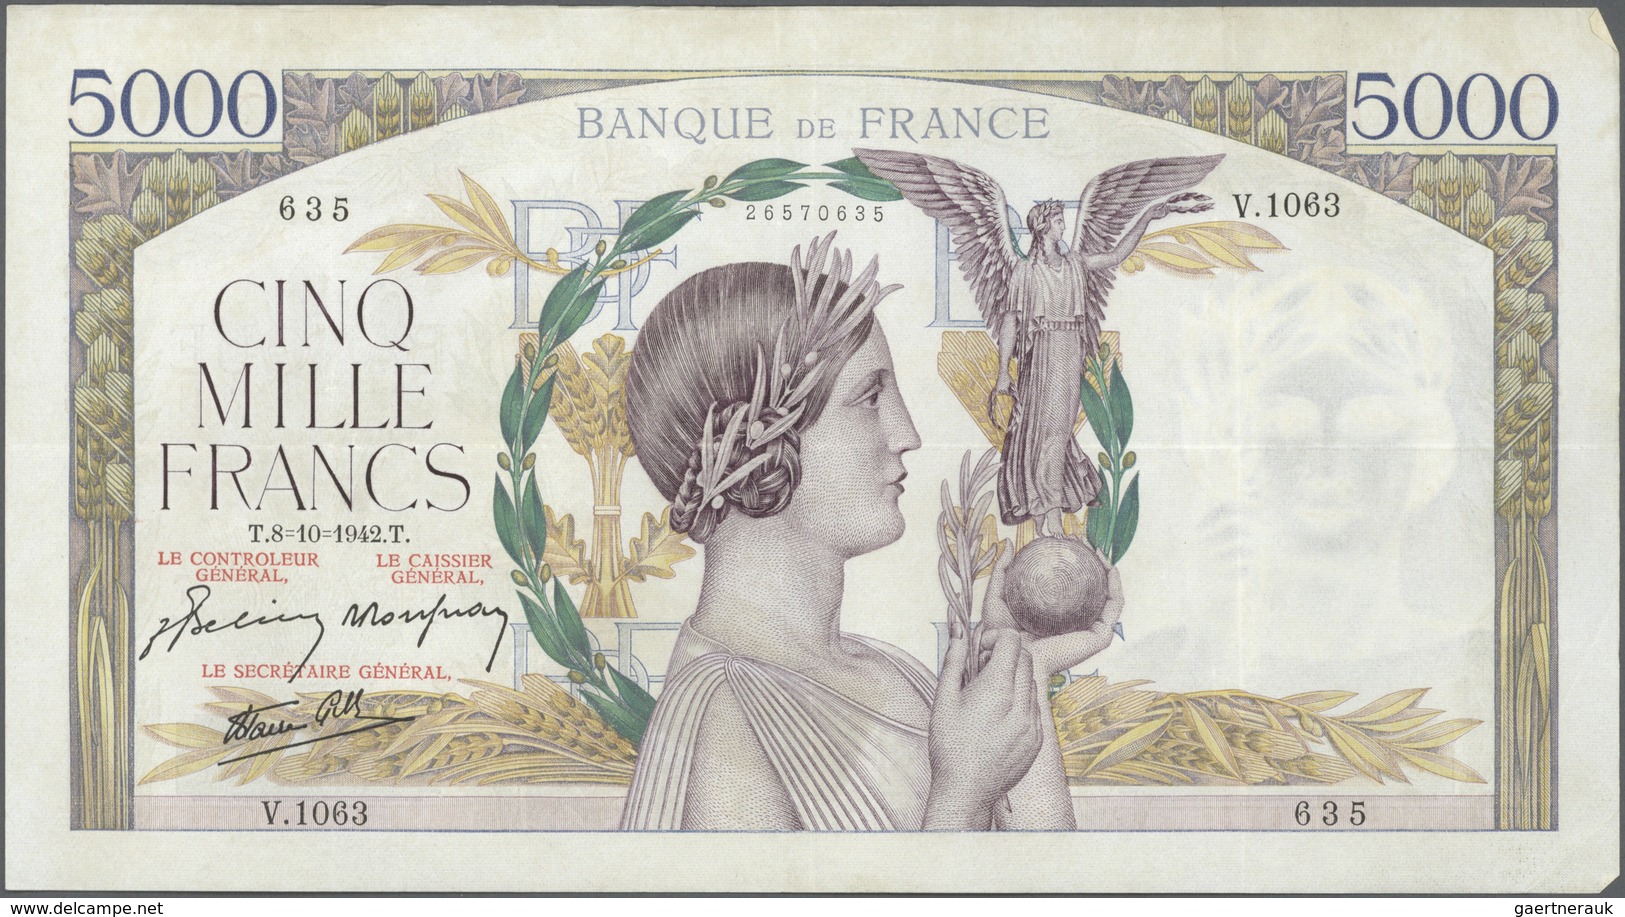 France / Frankreich: set of 22 notes 5000 Francs 1939-43 "Victoire" P. 97, all notes used with folds